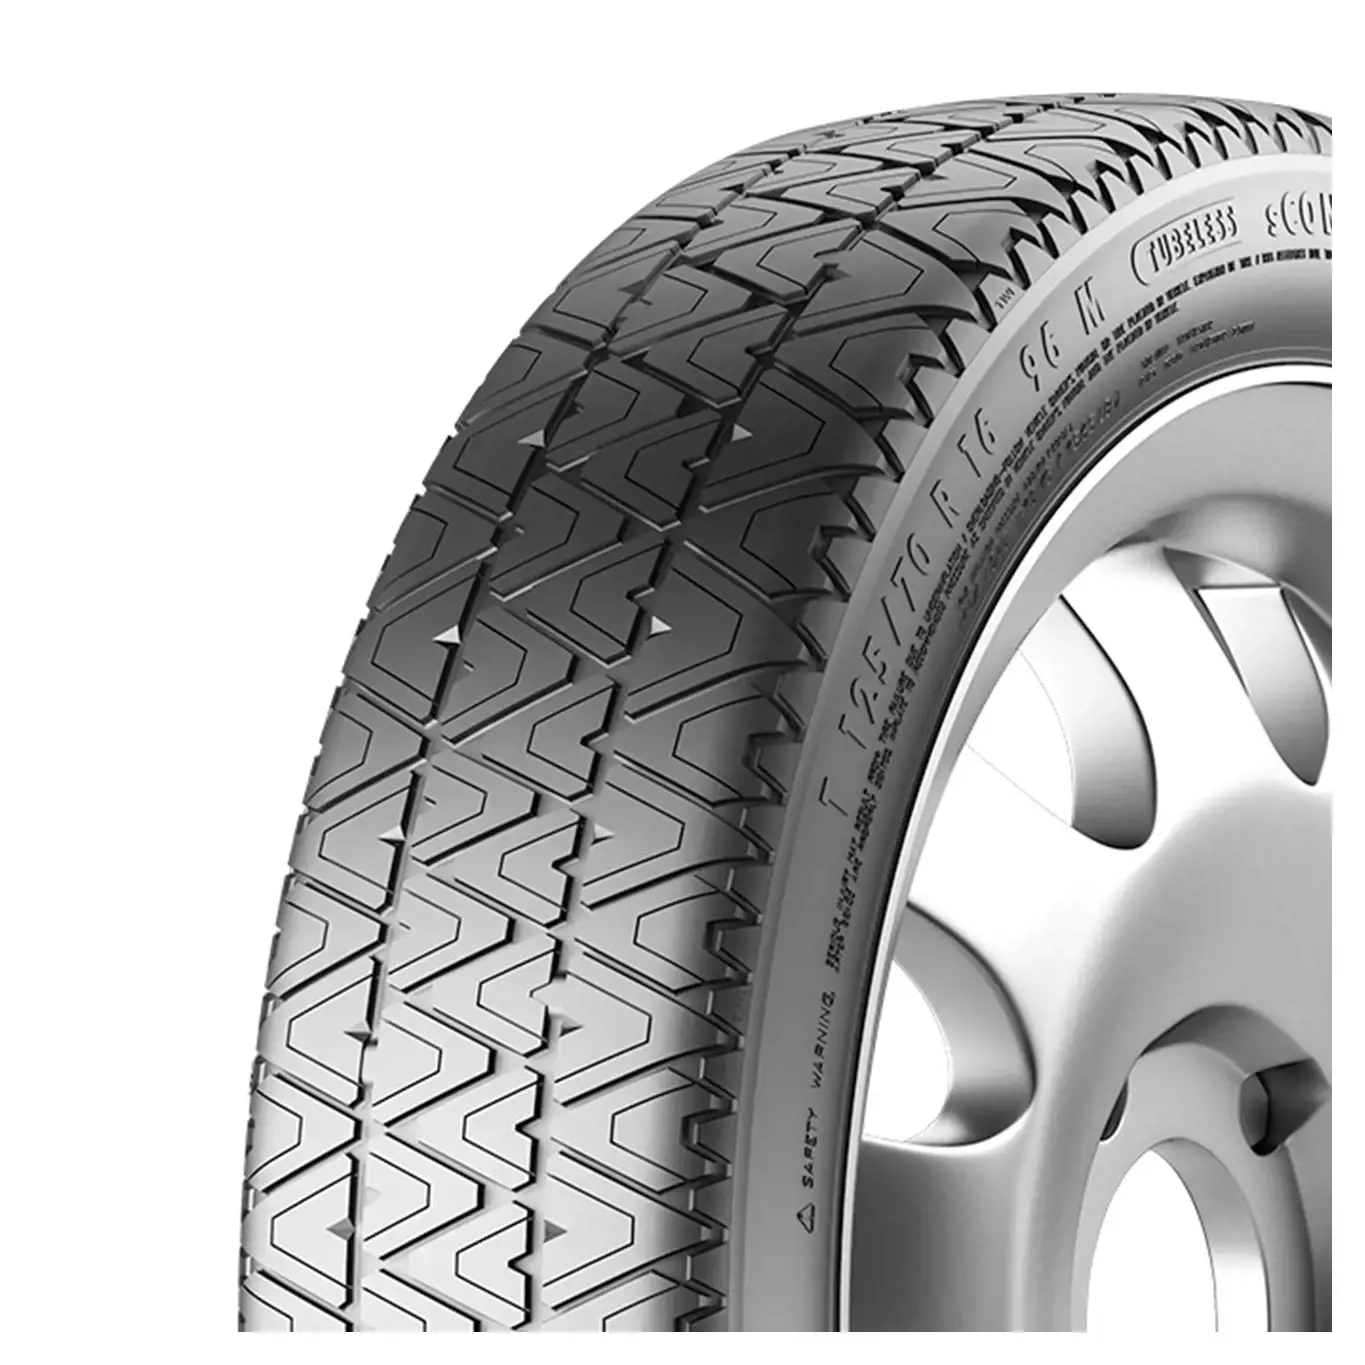 T135/80 R17 103M sContact